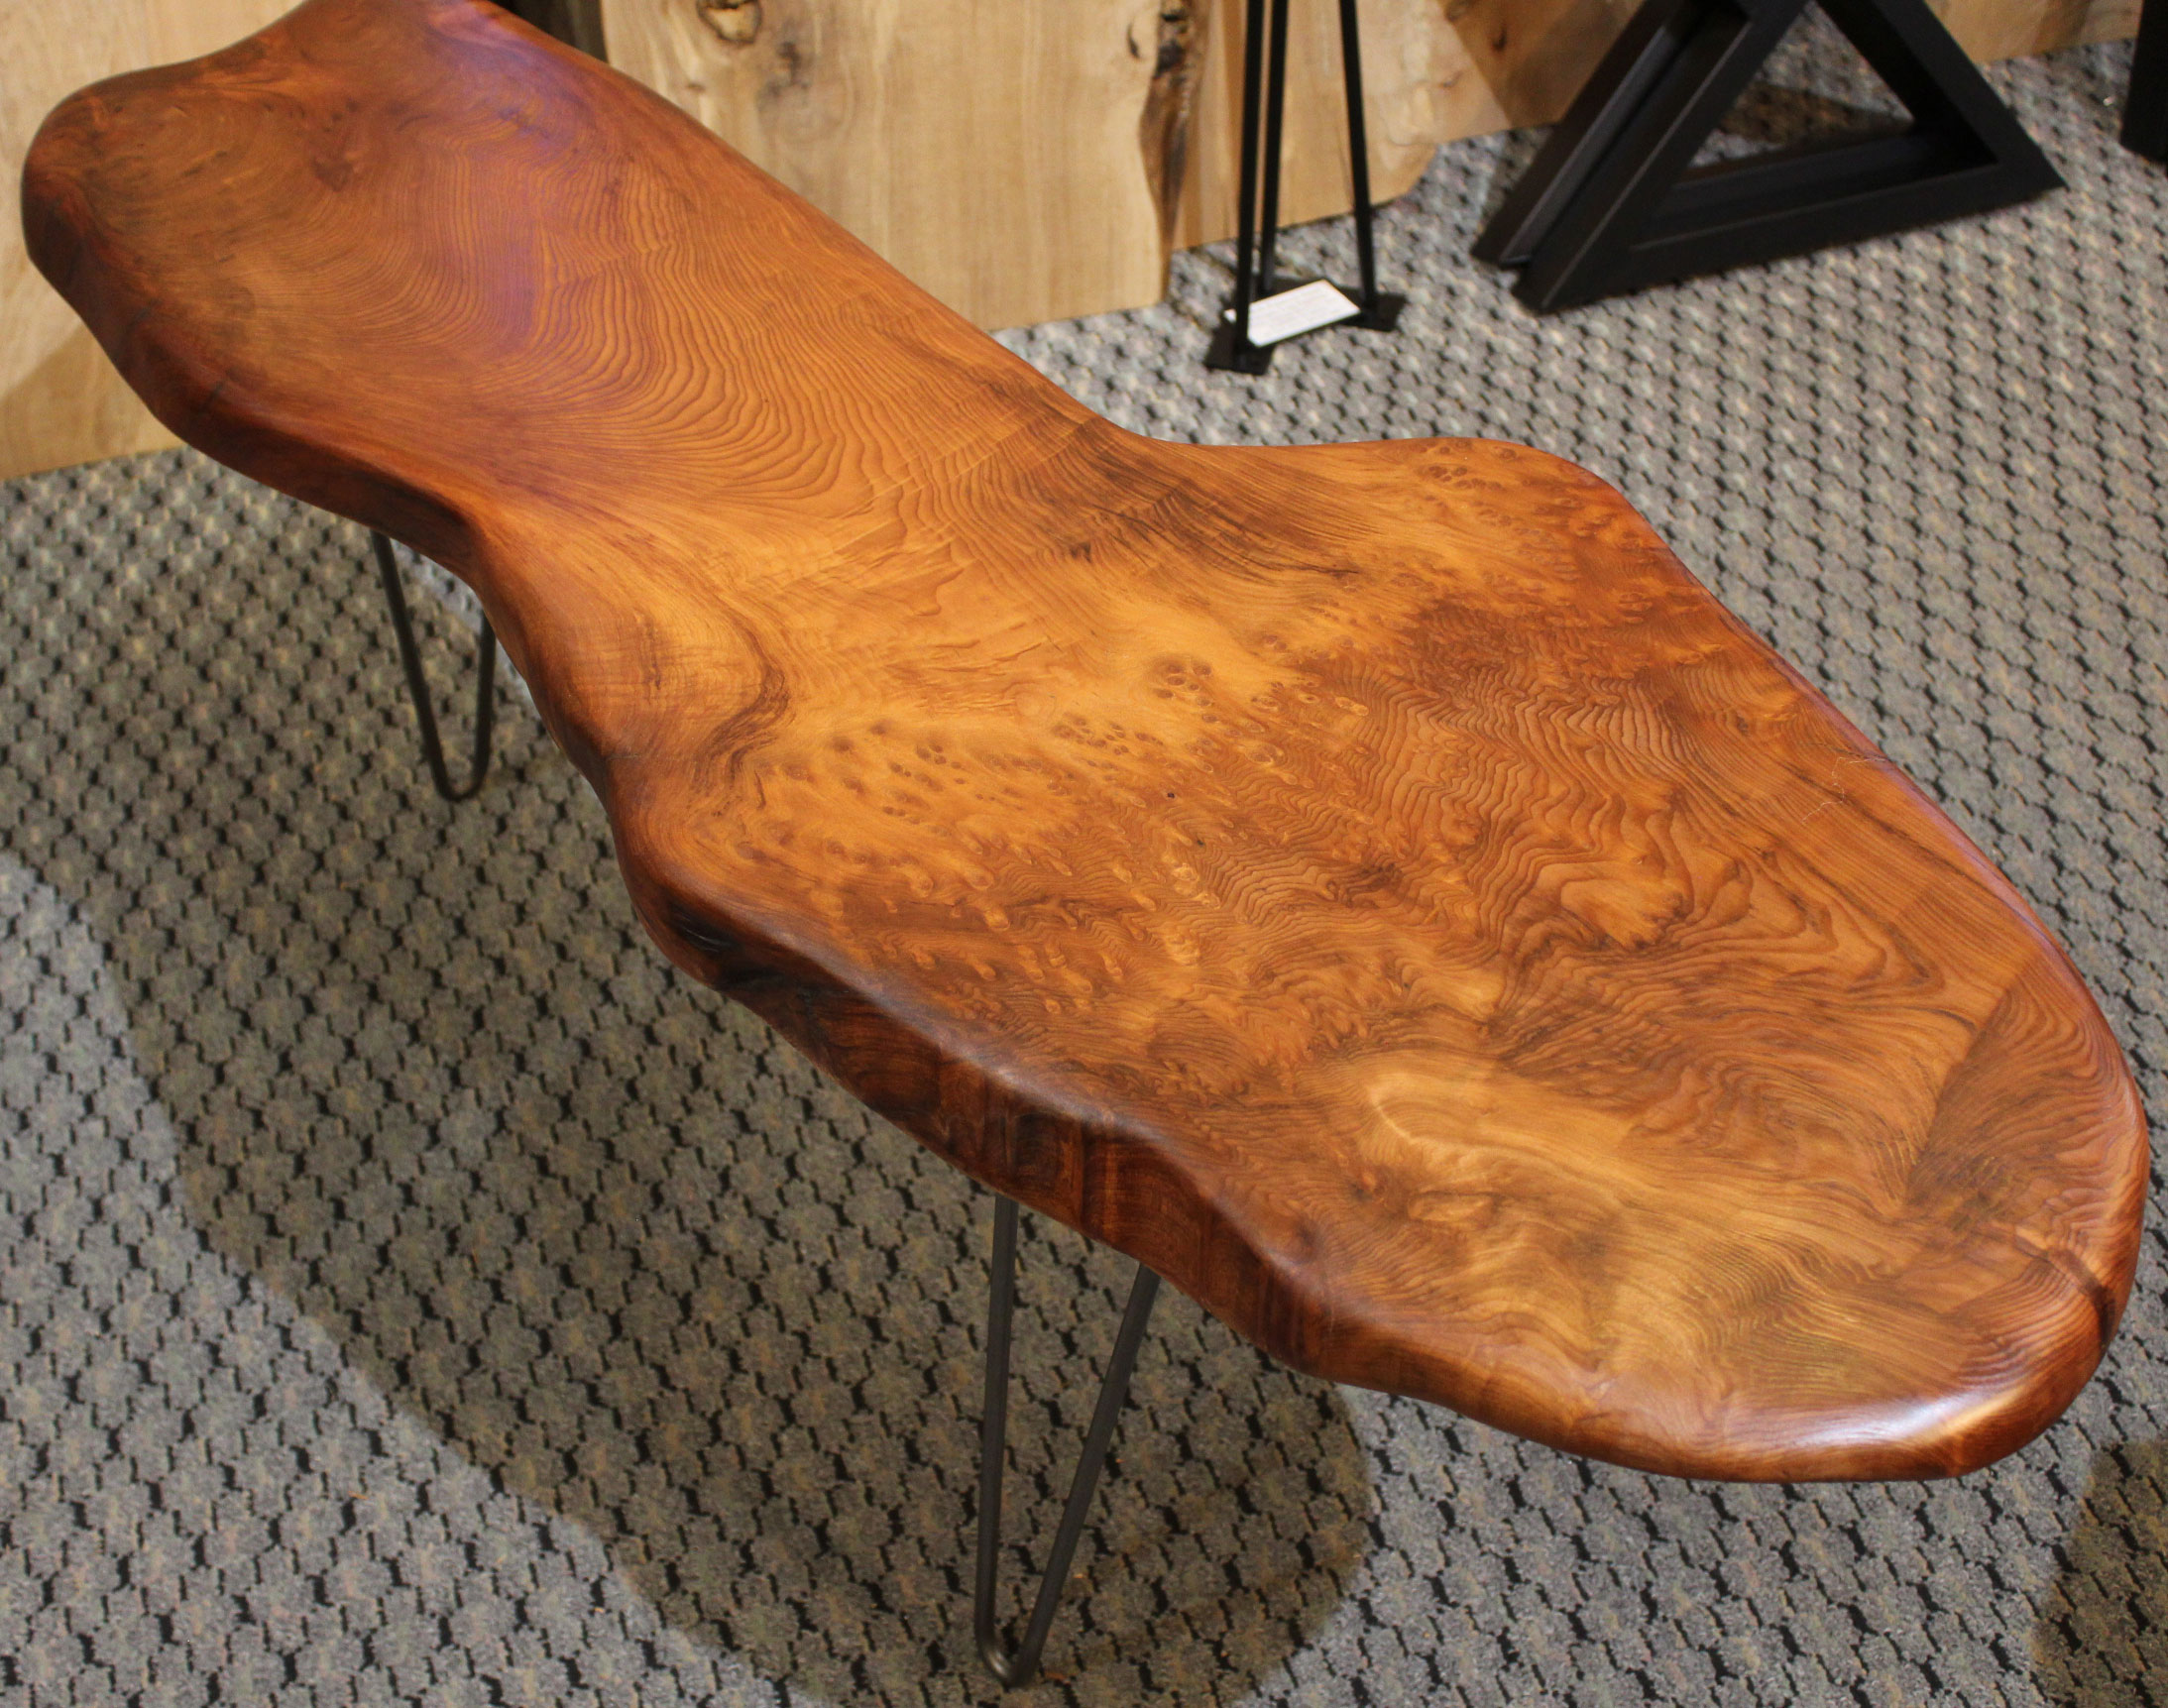 SOLD! Redwood Live-edge Coffee Table